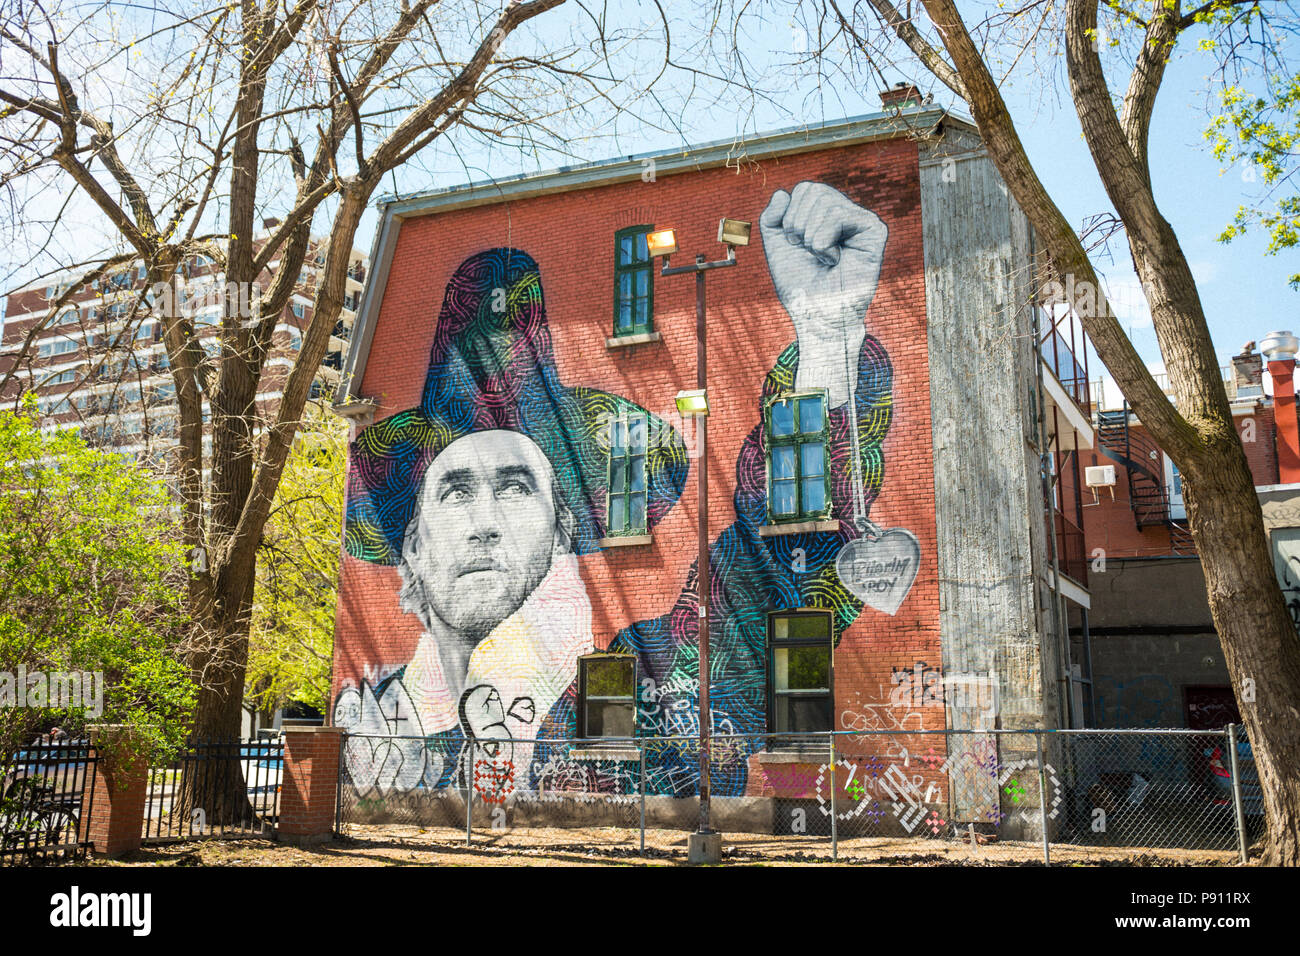 MONTREAL, CANADA APRIL 2018 - Creative graffiti street art murals line the streets and back alleys of Montreal, the largest city in Quebec, especially Stock Photo